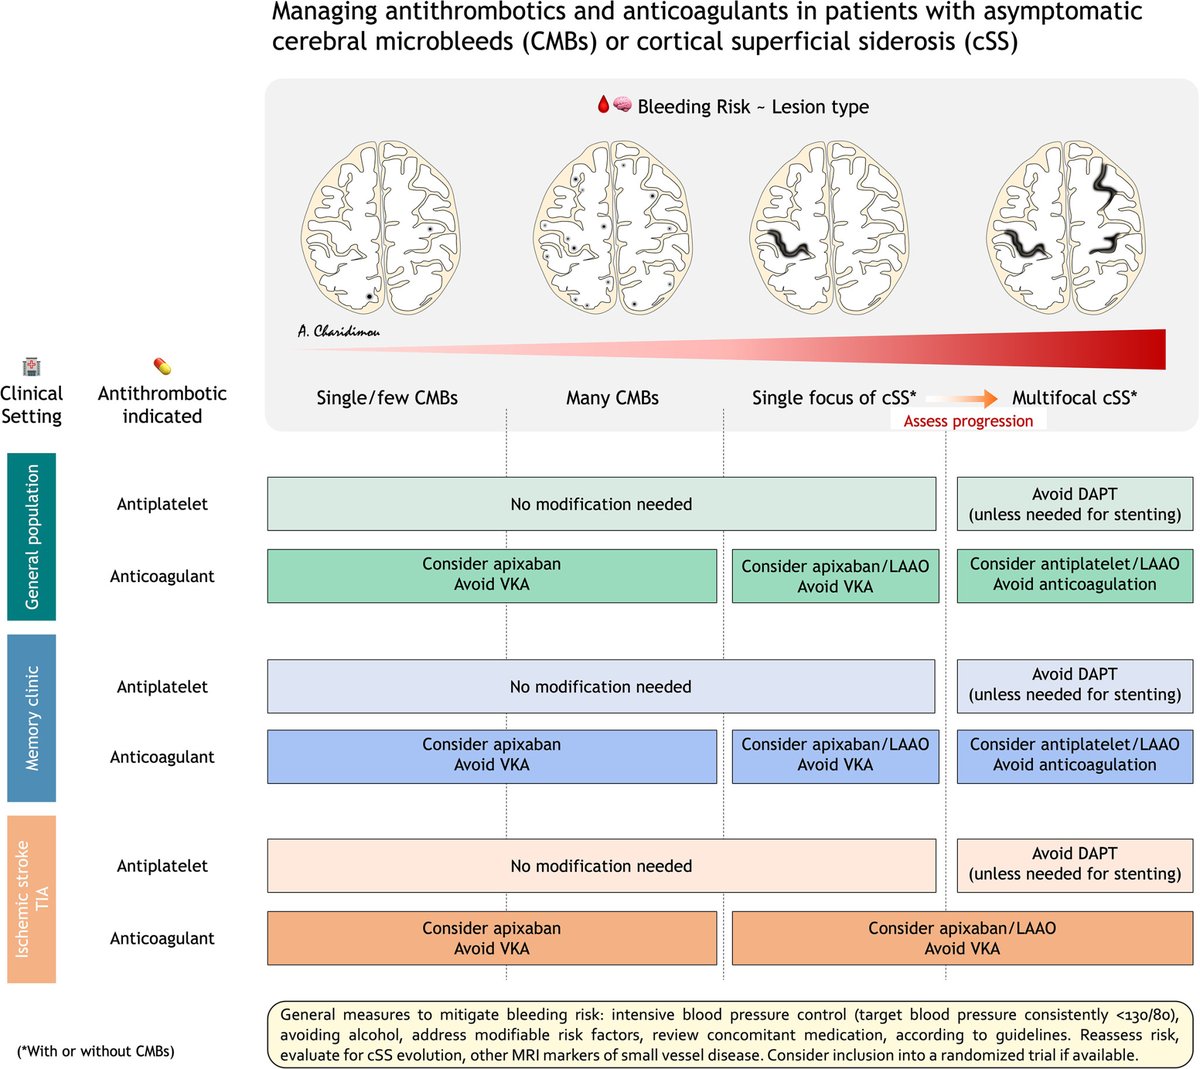 #STROKE Topical Review by @a_charidimou & @VCI_EricSmith: Cerebral microbleeds #CMBs in the setting of cerebral amyloid angiopathy #CAA: bleeding risk and safety of antithrombotic management. #AHAJournals ahajournals.org/doi/10.1161/ST…